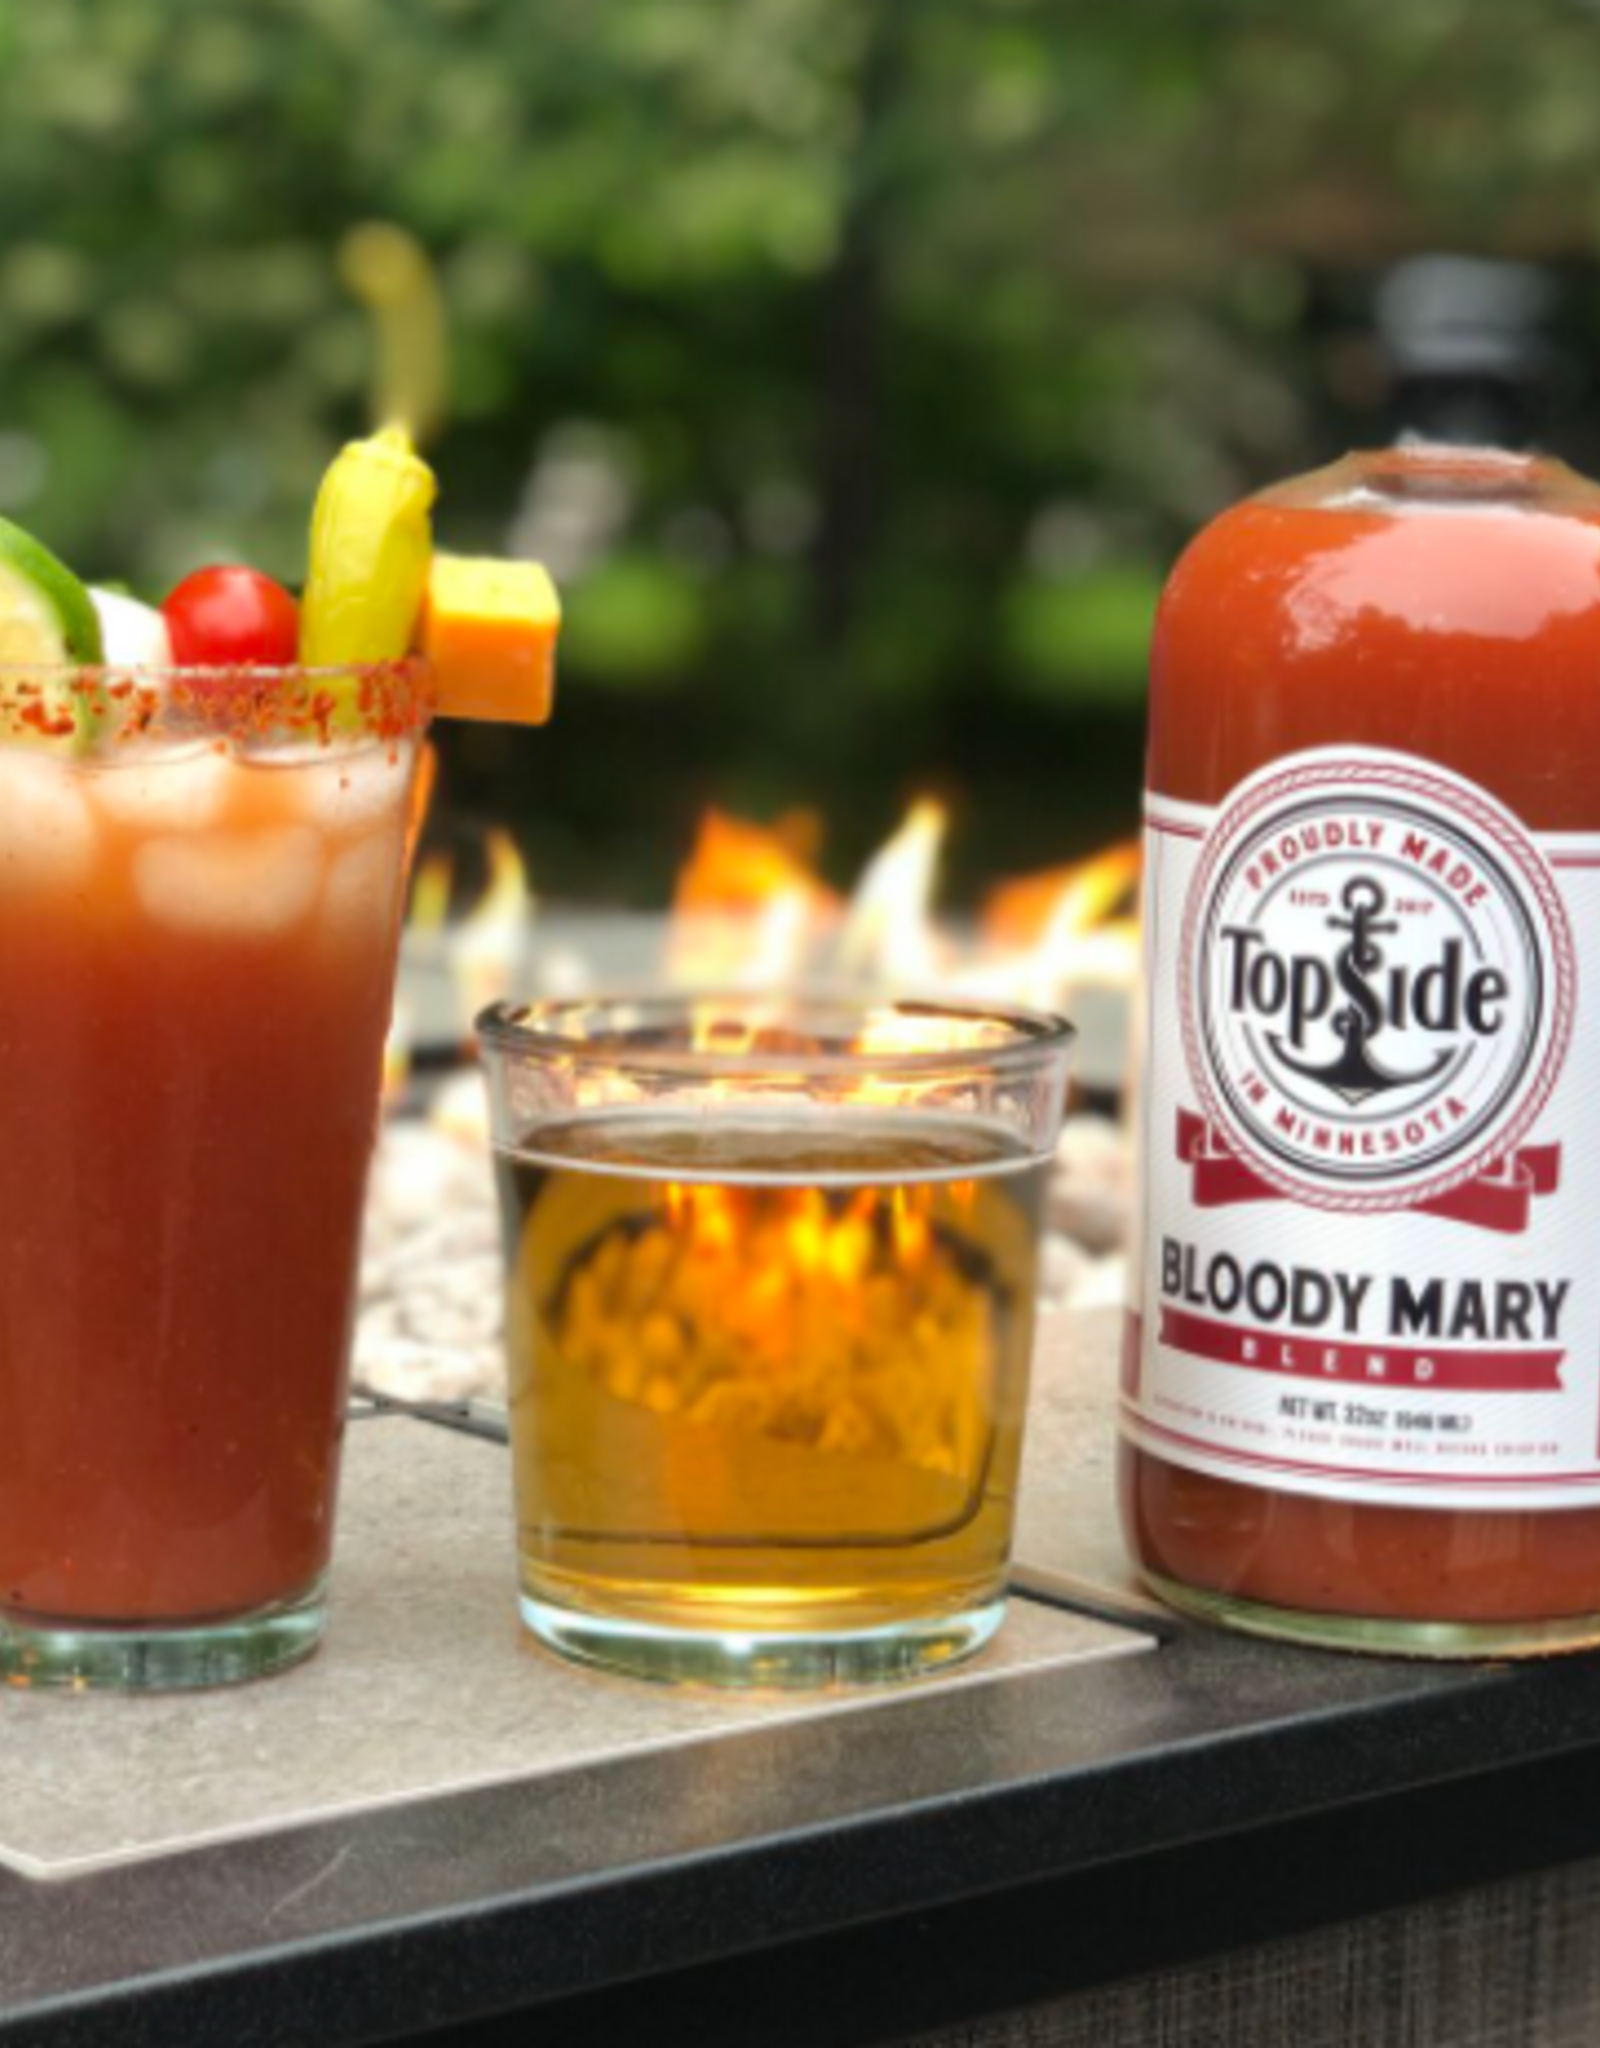 Topside TopSide Bloody Mary Mixer